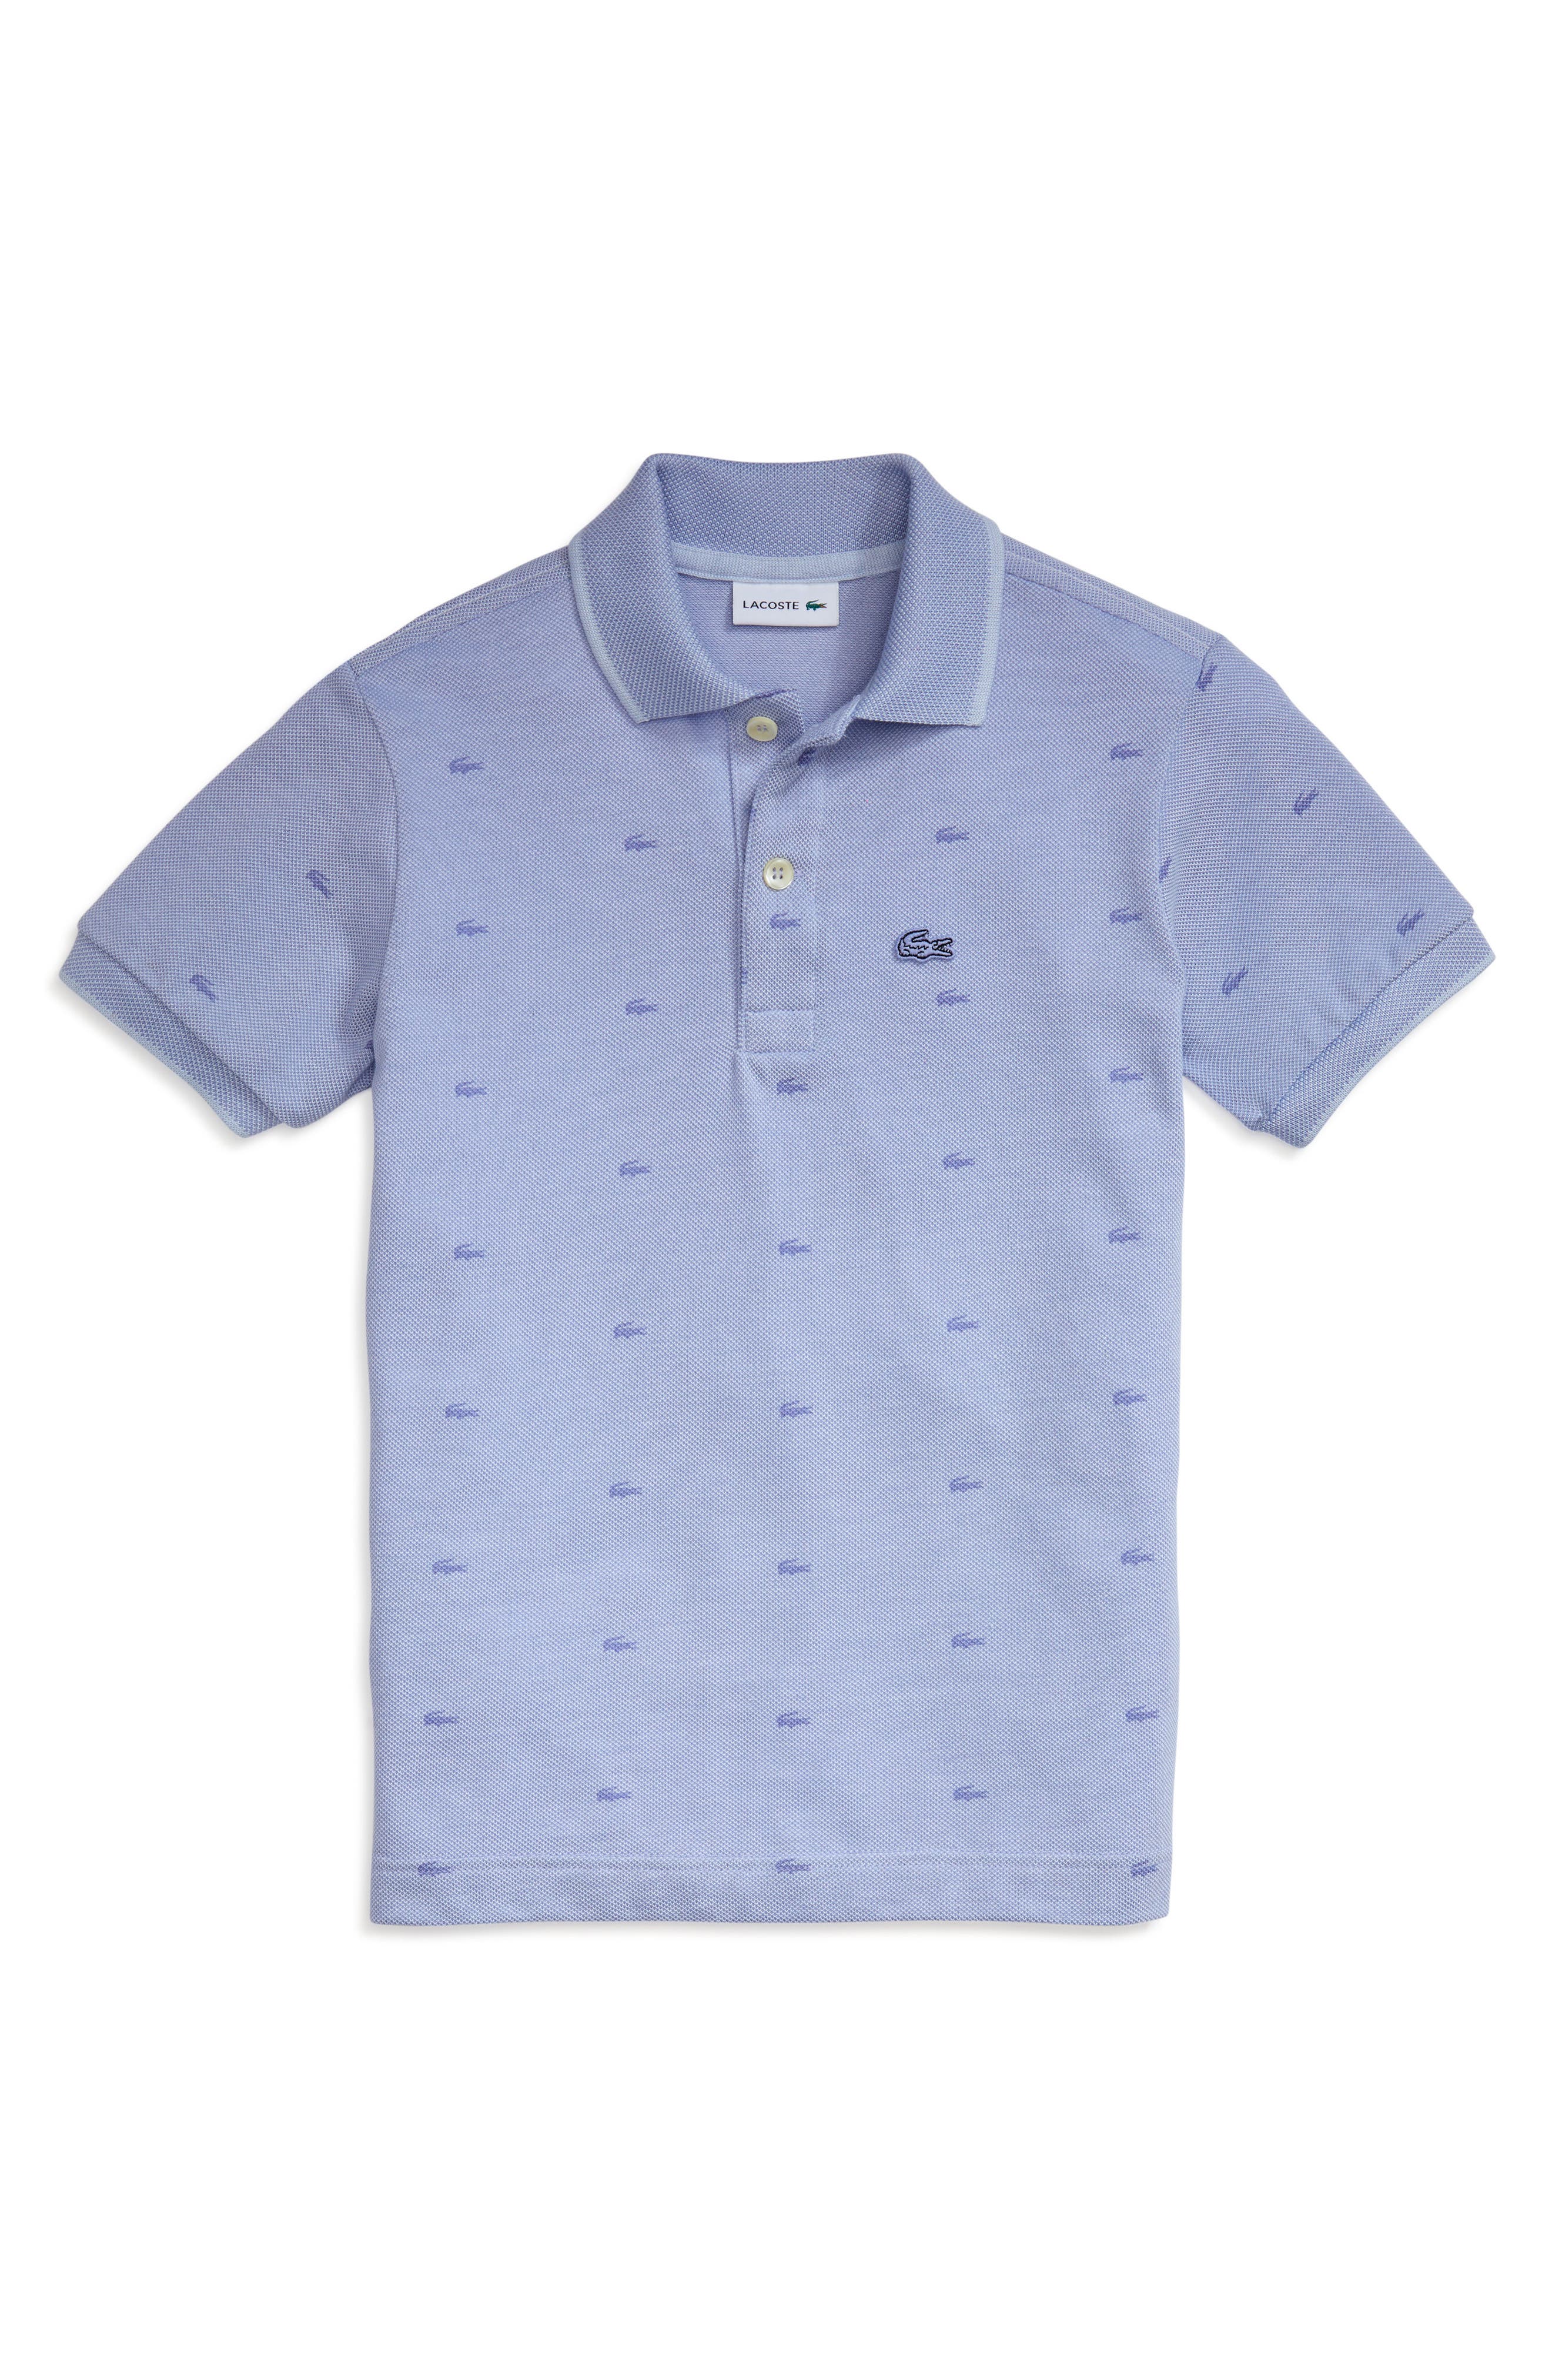 Lacoste Boys Polo Shirt Stacy Chine 